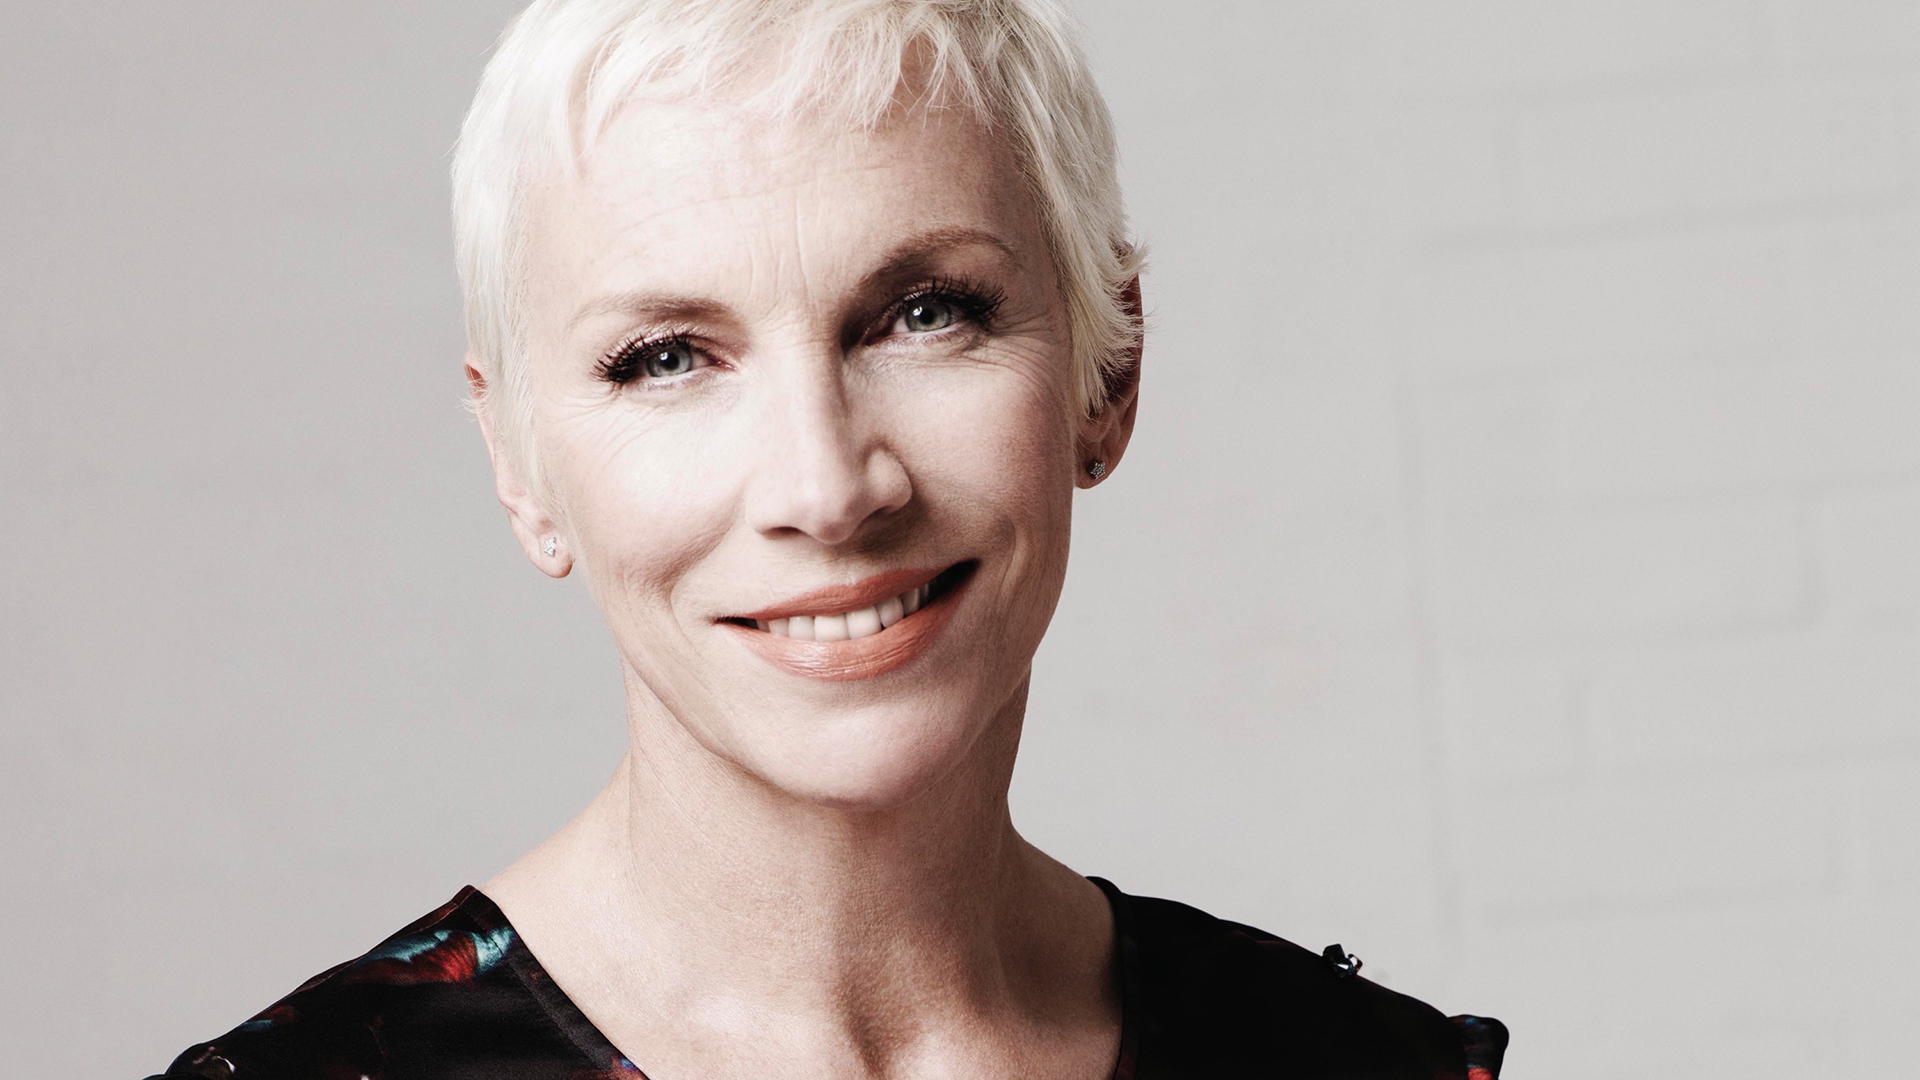 Annie Lennox Wallpaper Image Photos Pictures Background